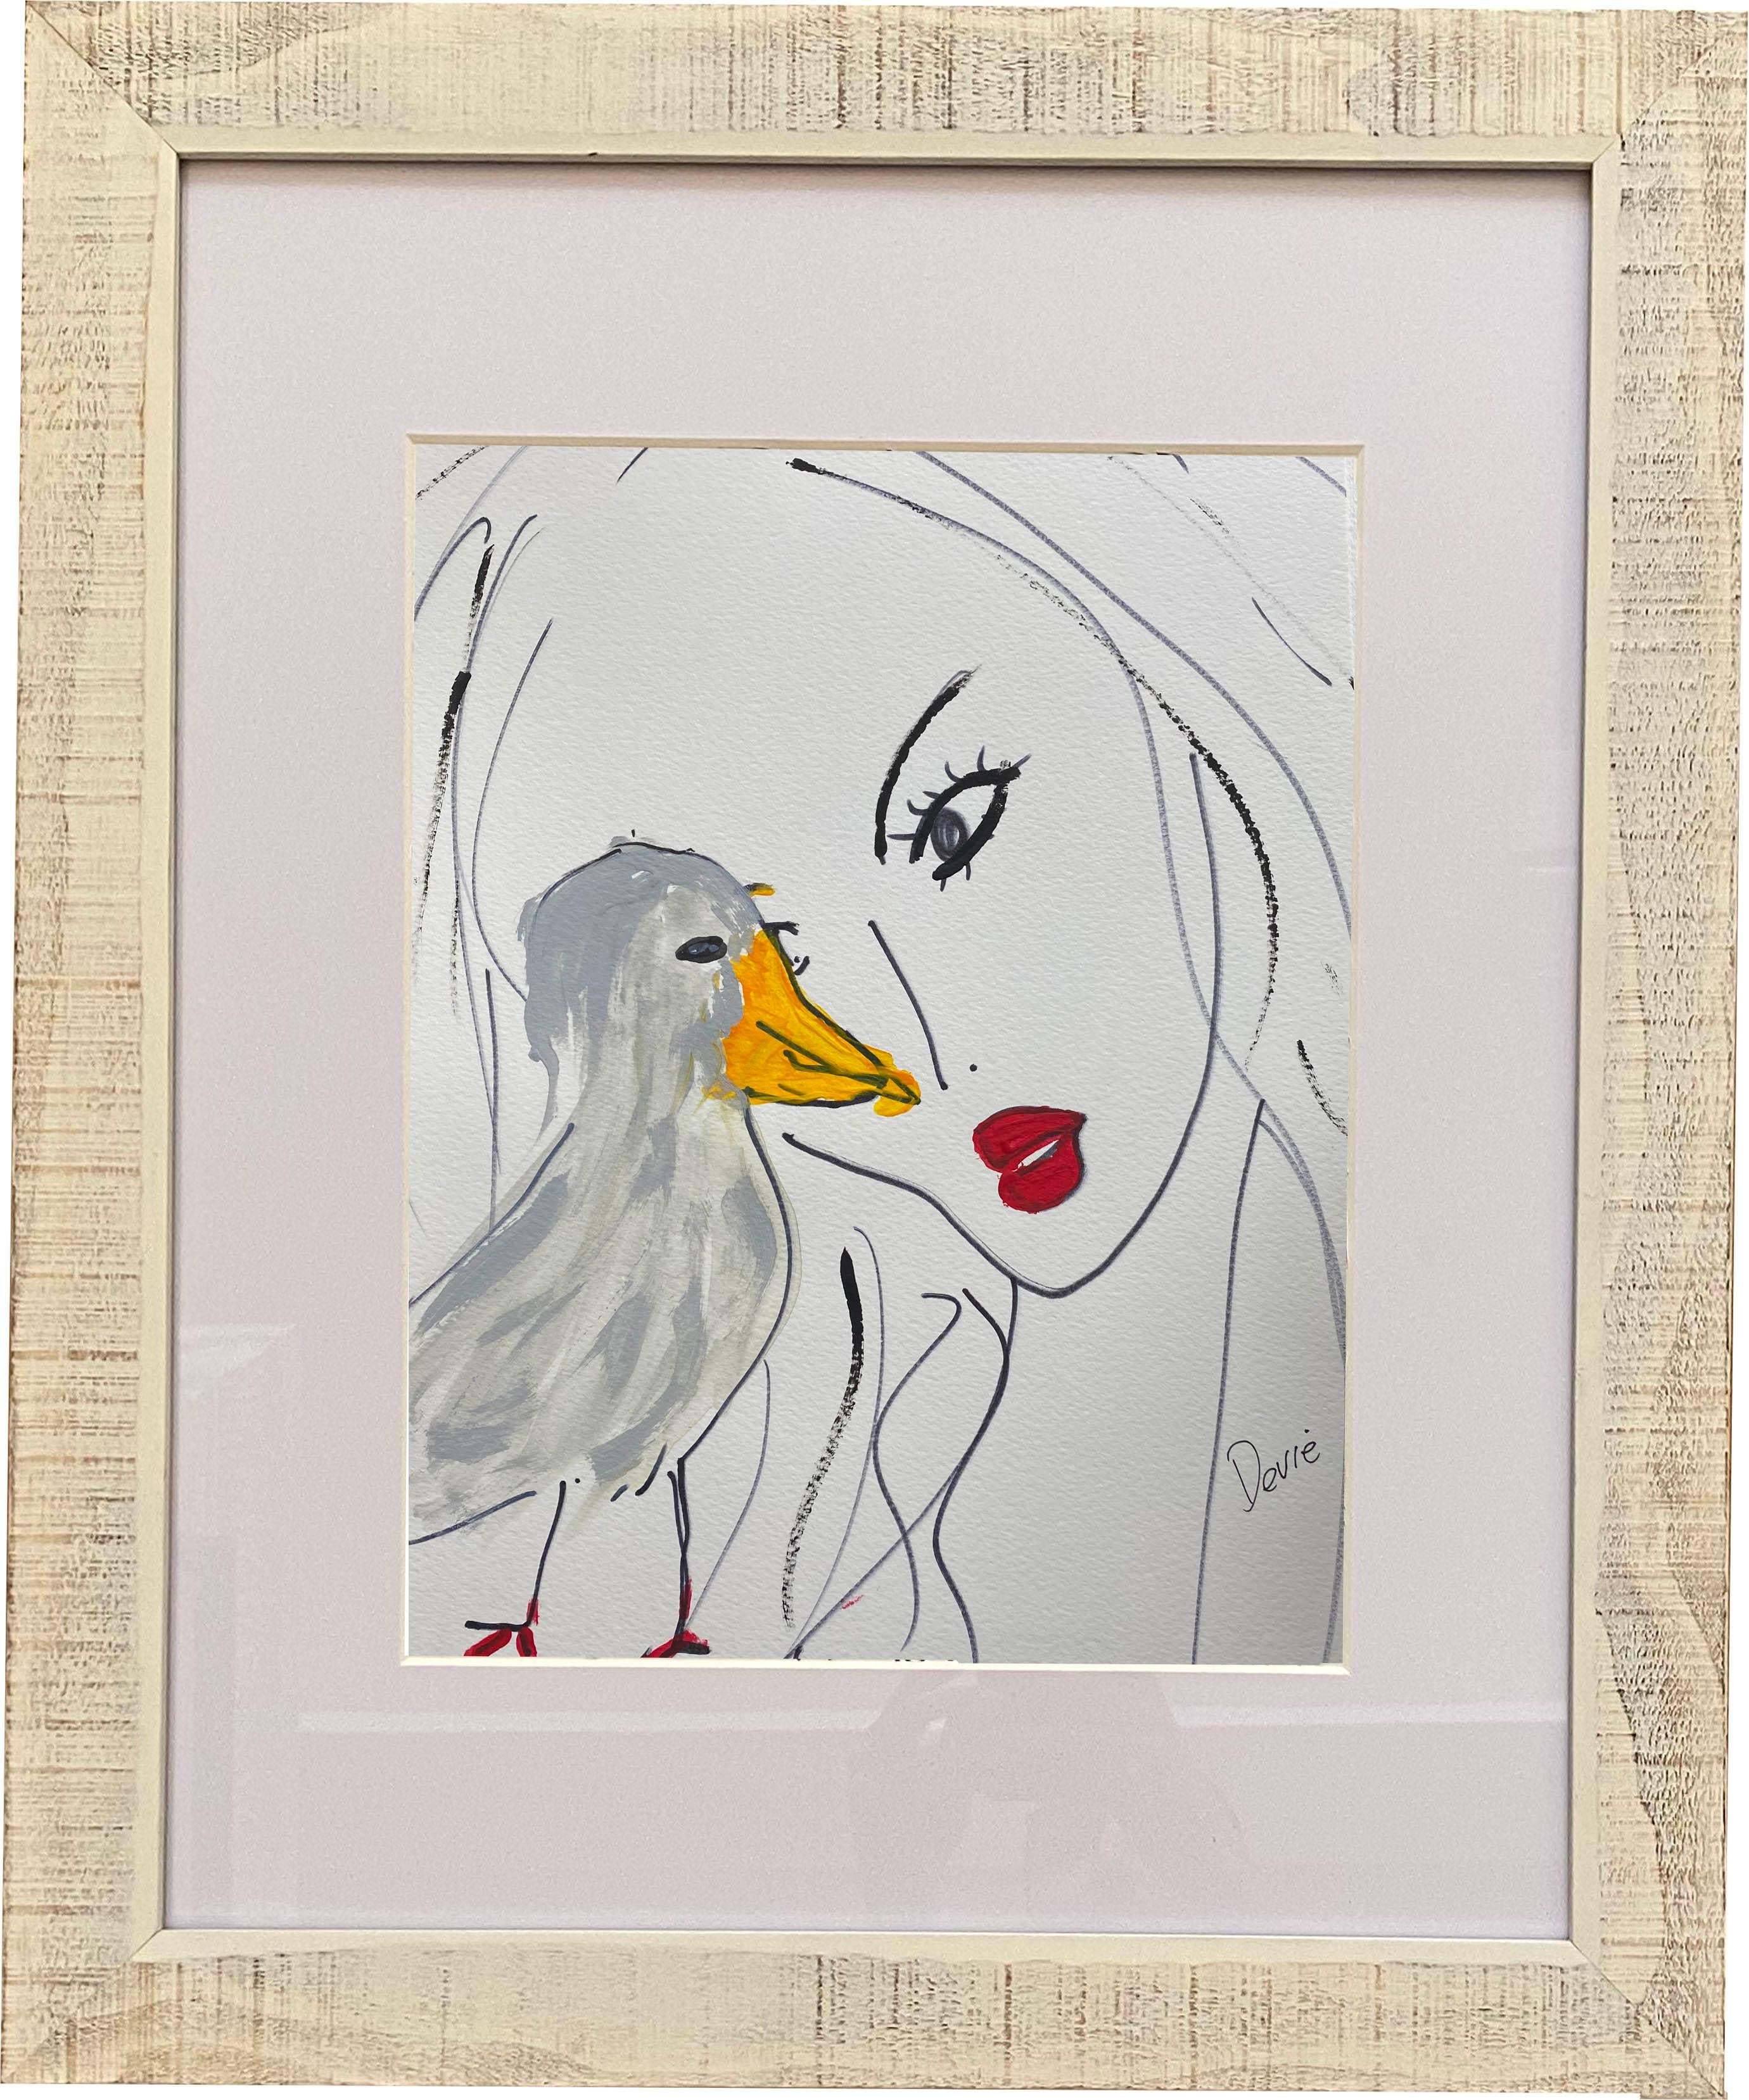 Gray Bird With Yellow Beak  Original Drawing Acrylic and ink on paper Framed - Art by Unknown